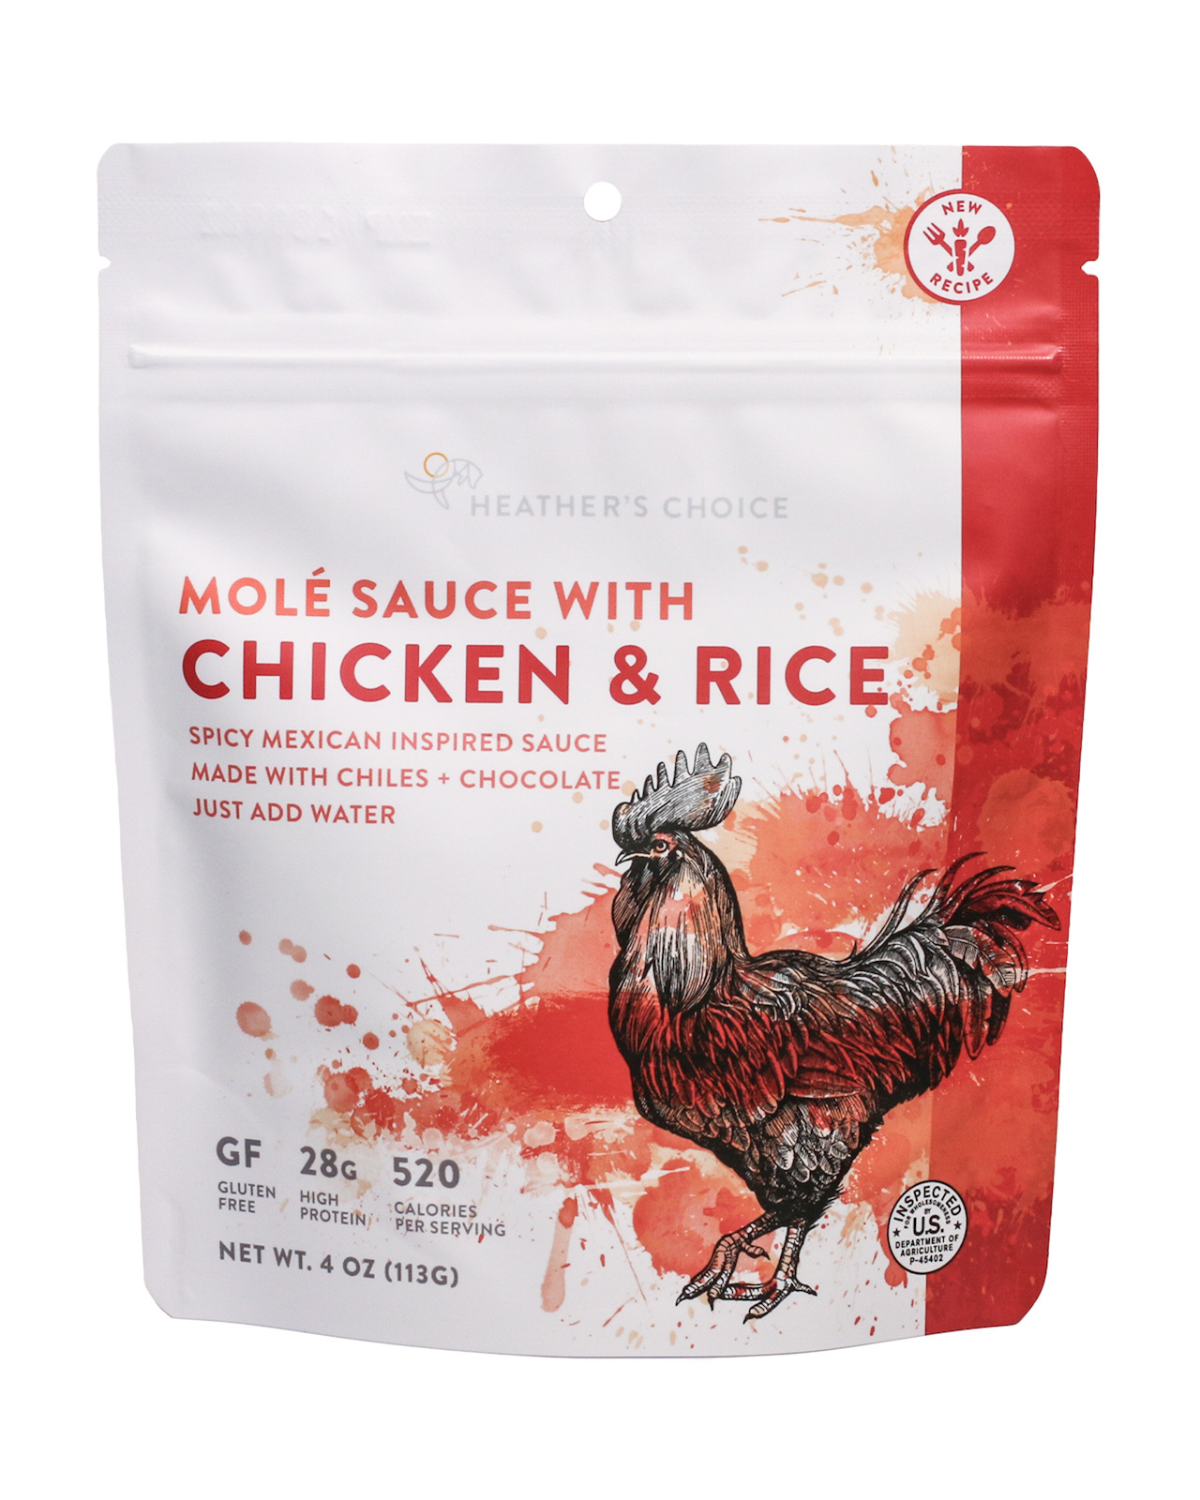 Molé Sauce with Chicken & Rice